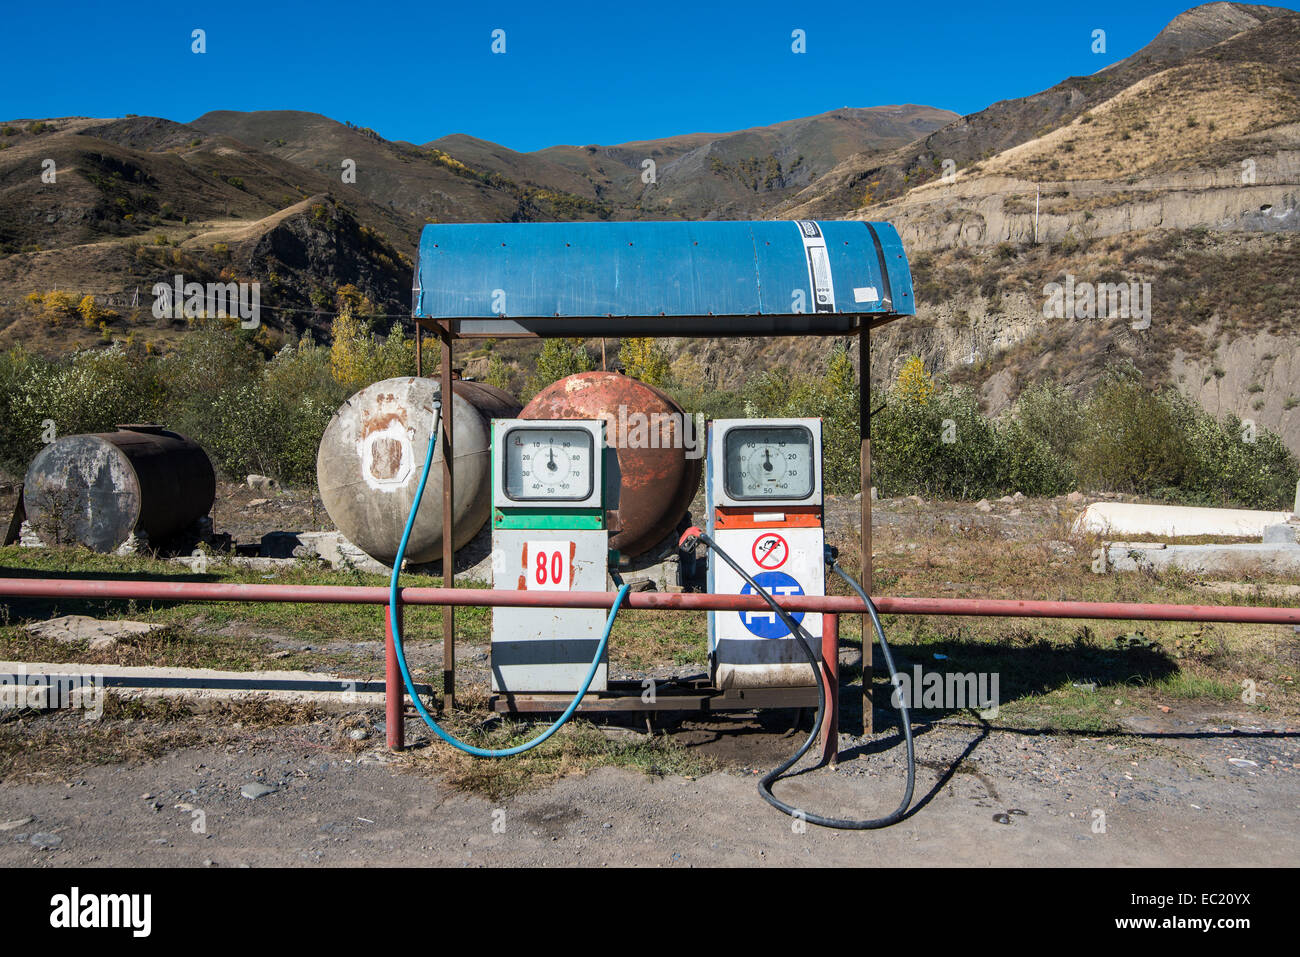 Remote gas station in the Caucasian moutains, Chechnya, Caucasus, Russia Stock Photo